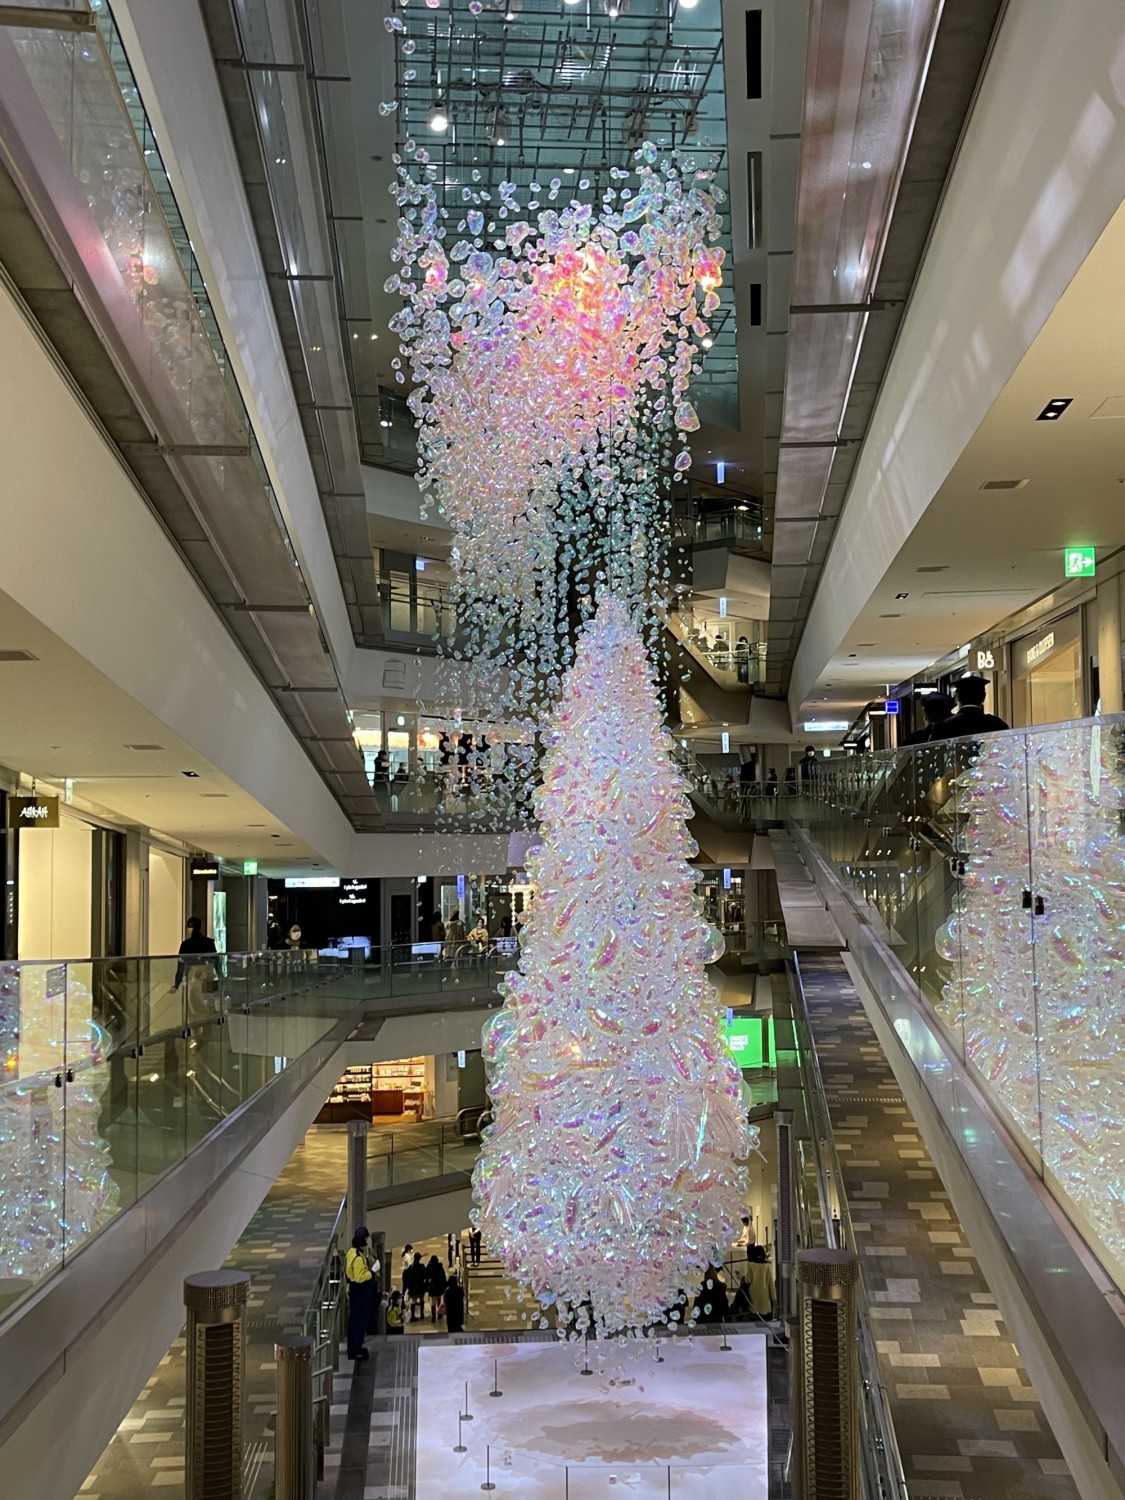 Christmas decorations in an indoor mall